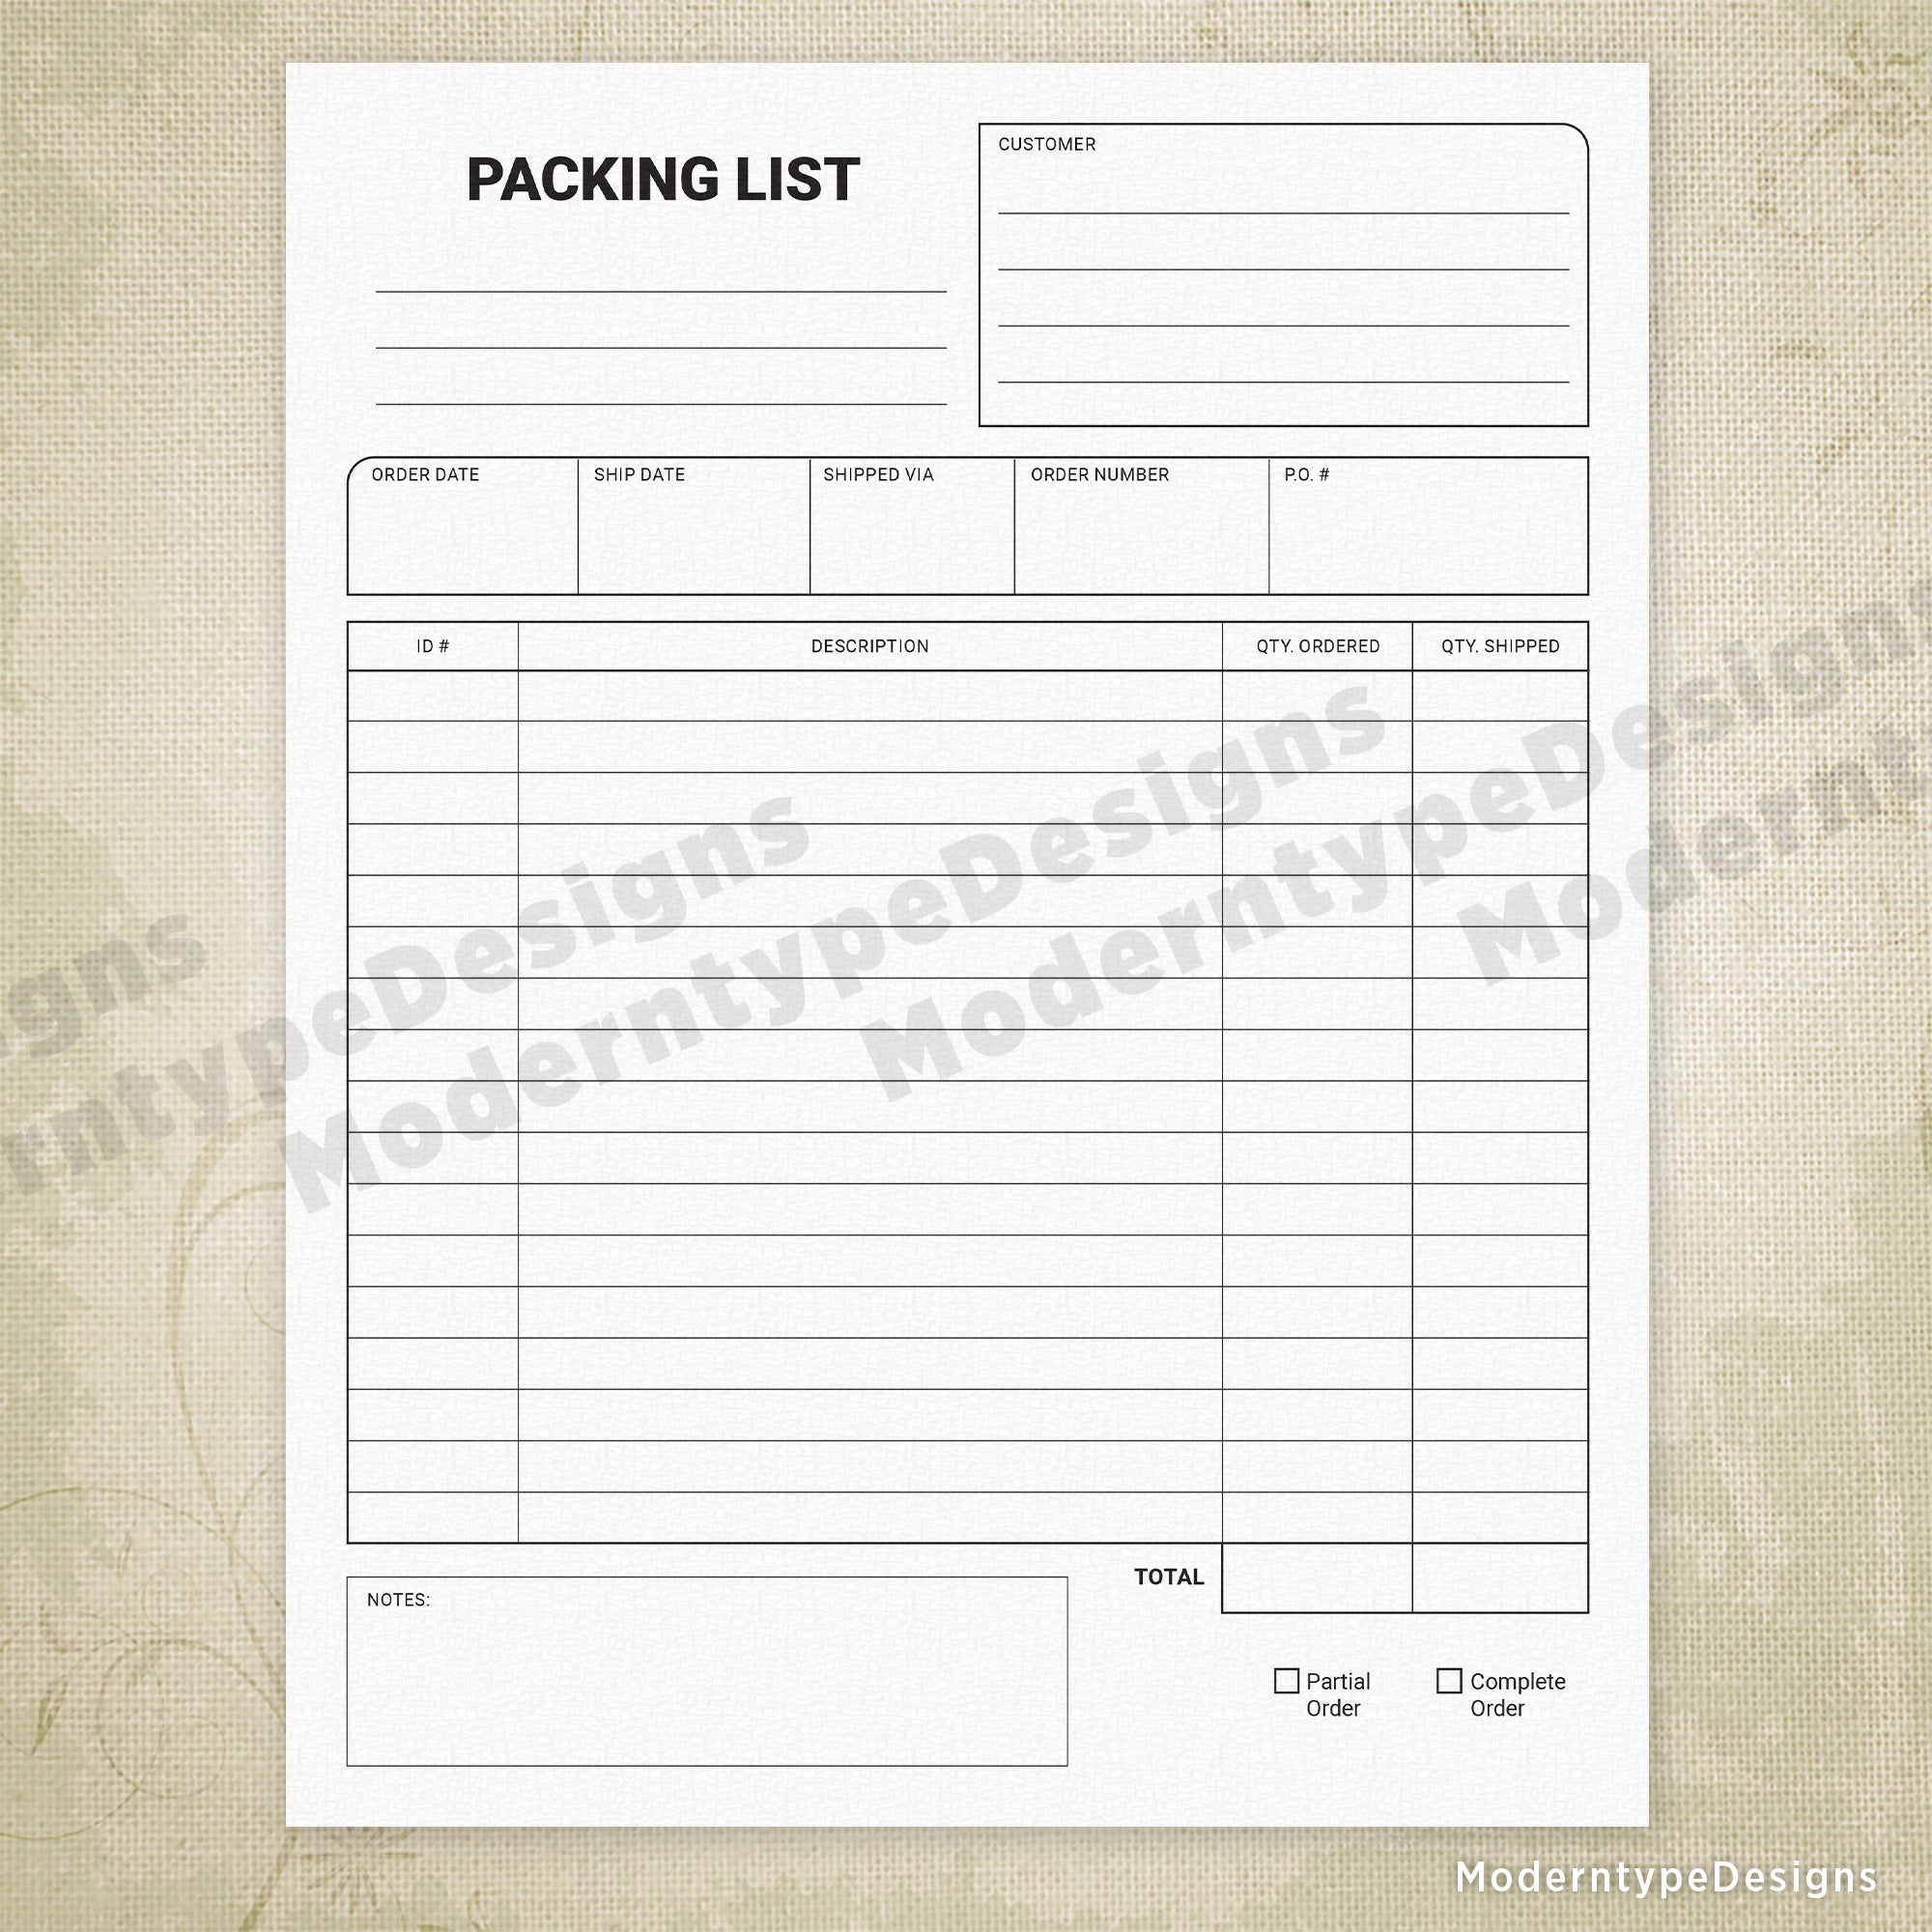 Packing List Printable Form, #2